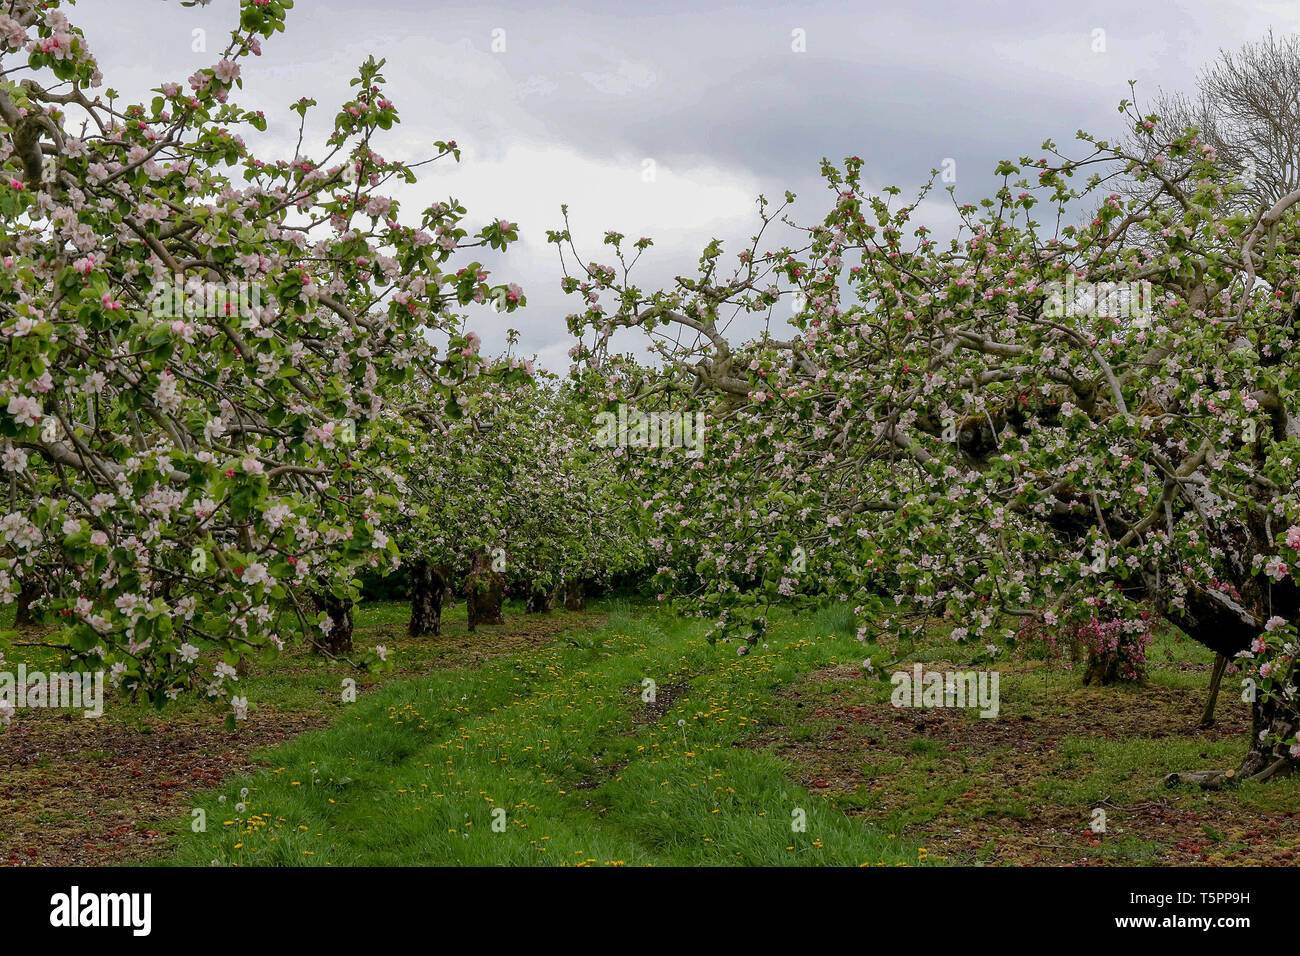 Knocknamuckley, Portadown, County Armagh, Northern Ireland. 26 Apr, 2019. Uk weather: increasing wind and grey sky indicates that storm Hannah is moving closer to the Uk and Ireland. Northern Ireland will experience gales and heavy rain but not to the same extent as other parts of the UK. The apple blossom here in this orchard at Knocknamuckley will be badly affected. Credit: David Hunter/Alamy Live News. Stock Photo